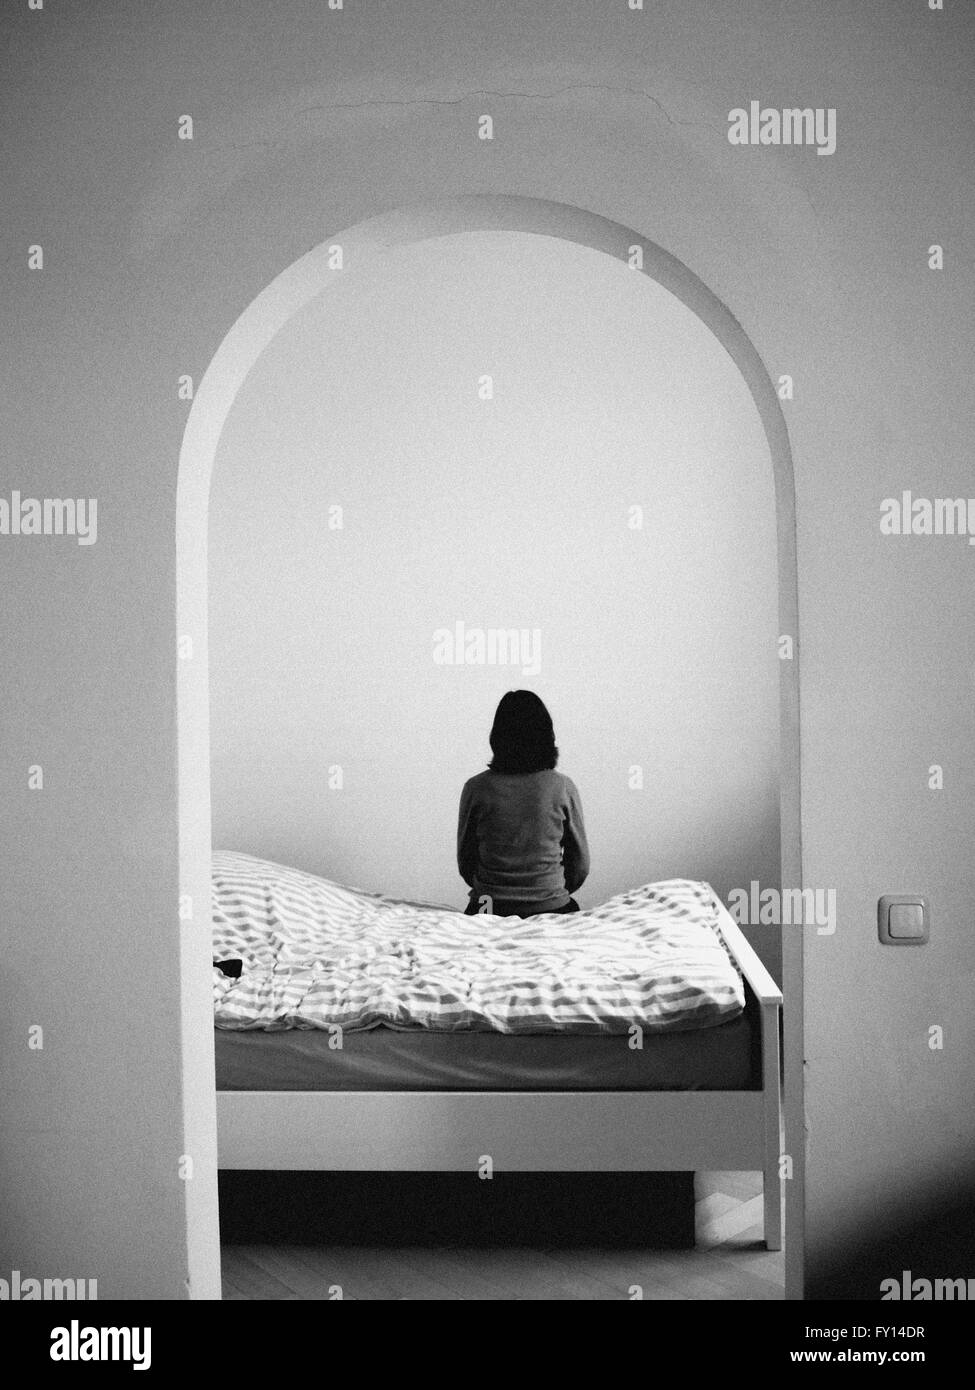 Rear view of woman sitting on a bed Stock Photo